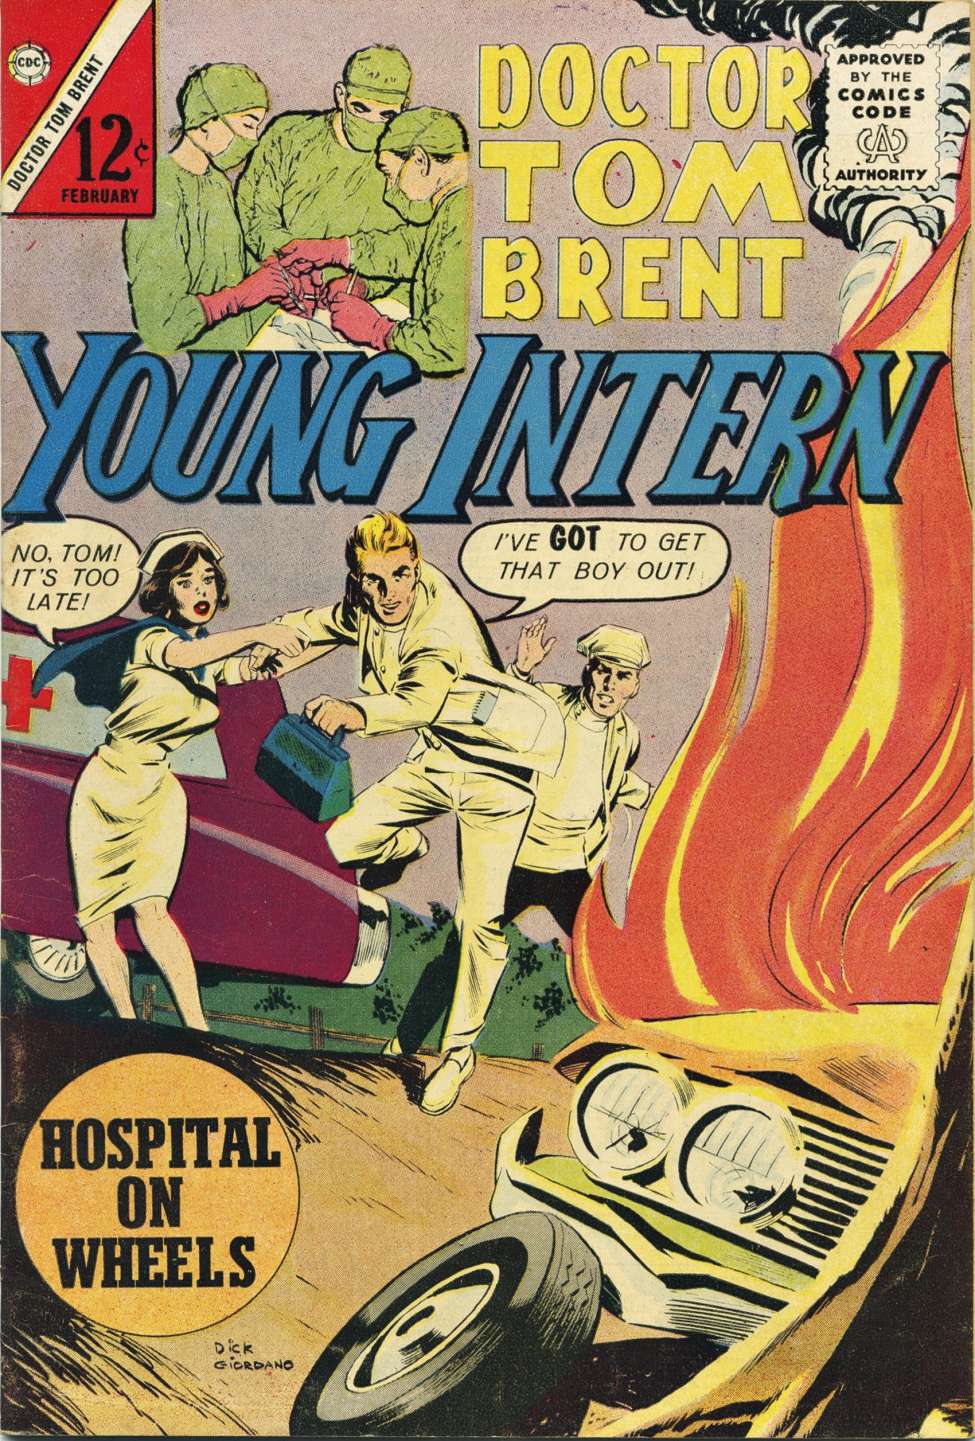 Comic Book Cover For Doctor Tom Brent, Young Intern 1